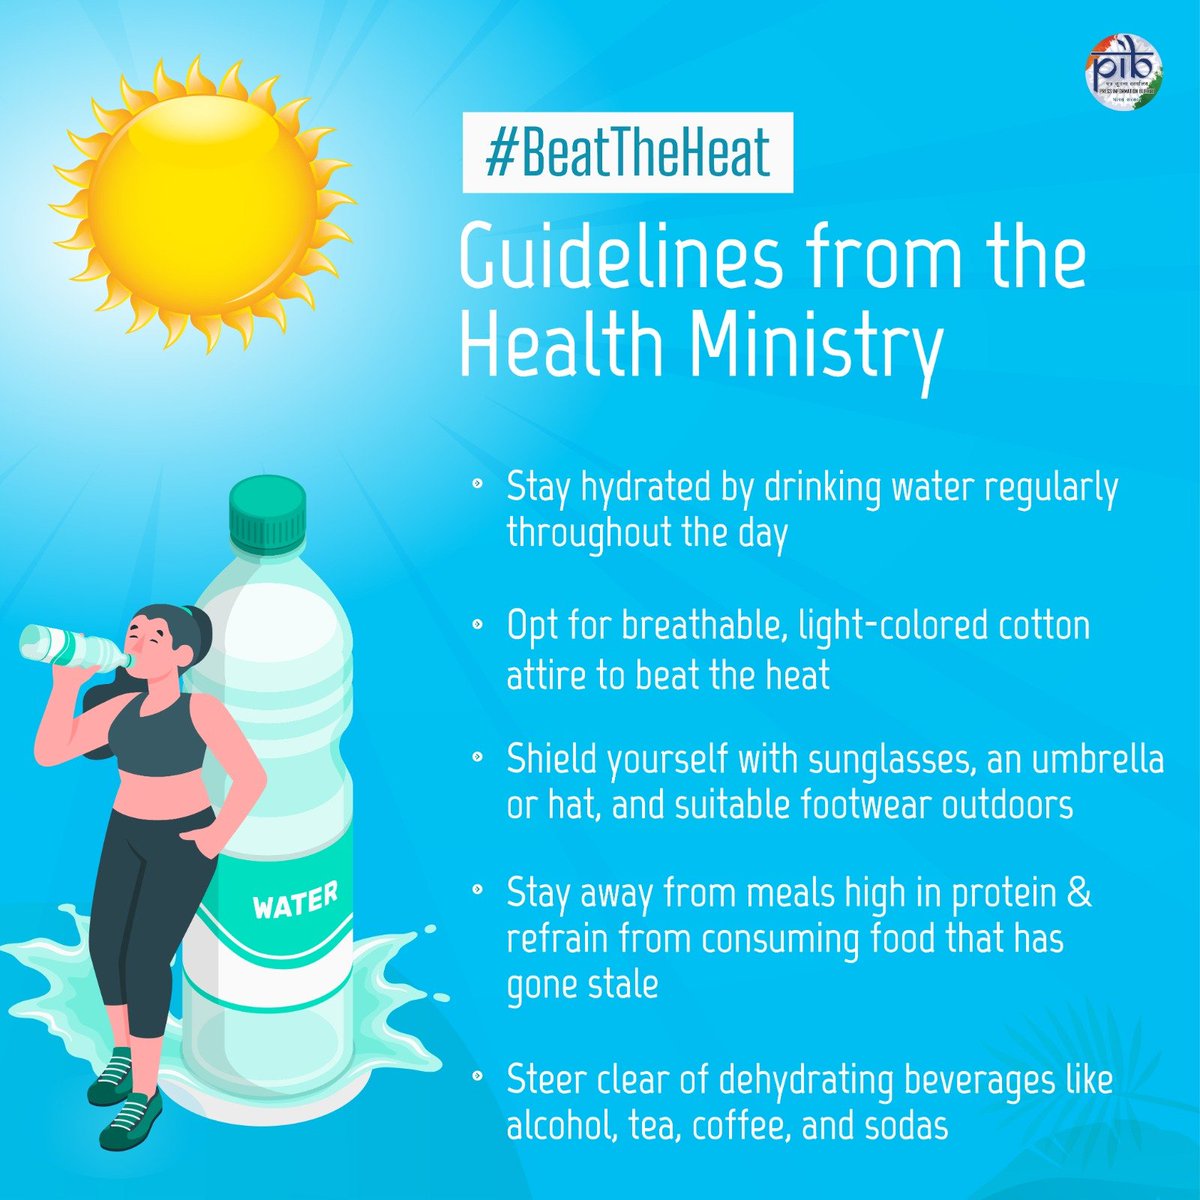 ➡️ #BeatTheHeat with the essential guidelines and tips from @MoHFW_INDIA 

✅ Stay hydrated by drinking water regularly throughout the day

✅ Opt for breathable, light colored cotton attire to beat the heat